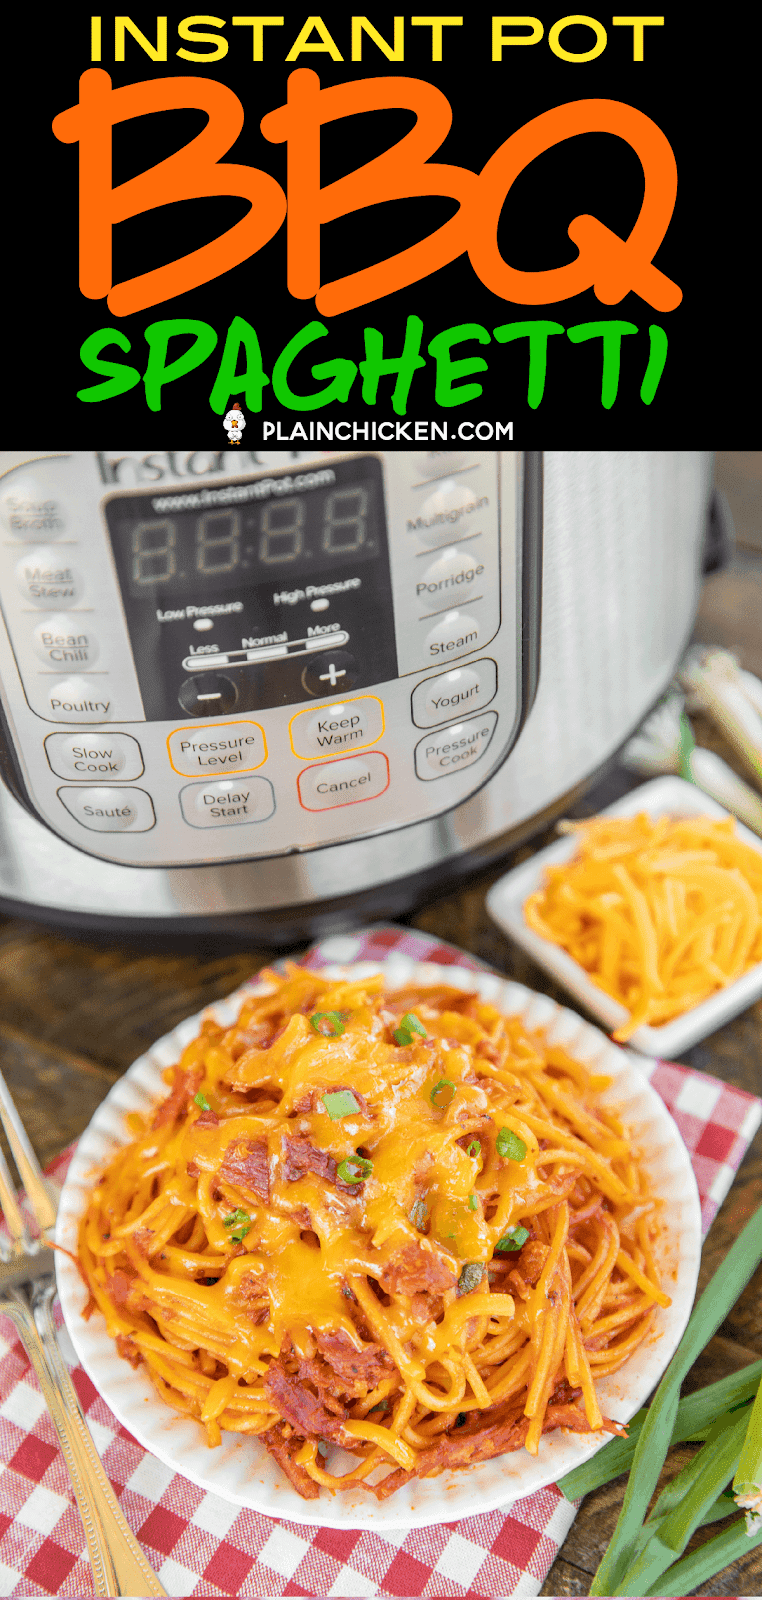 bbq spaghetti on a plate with an instant pot in the background